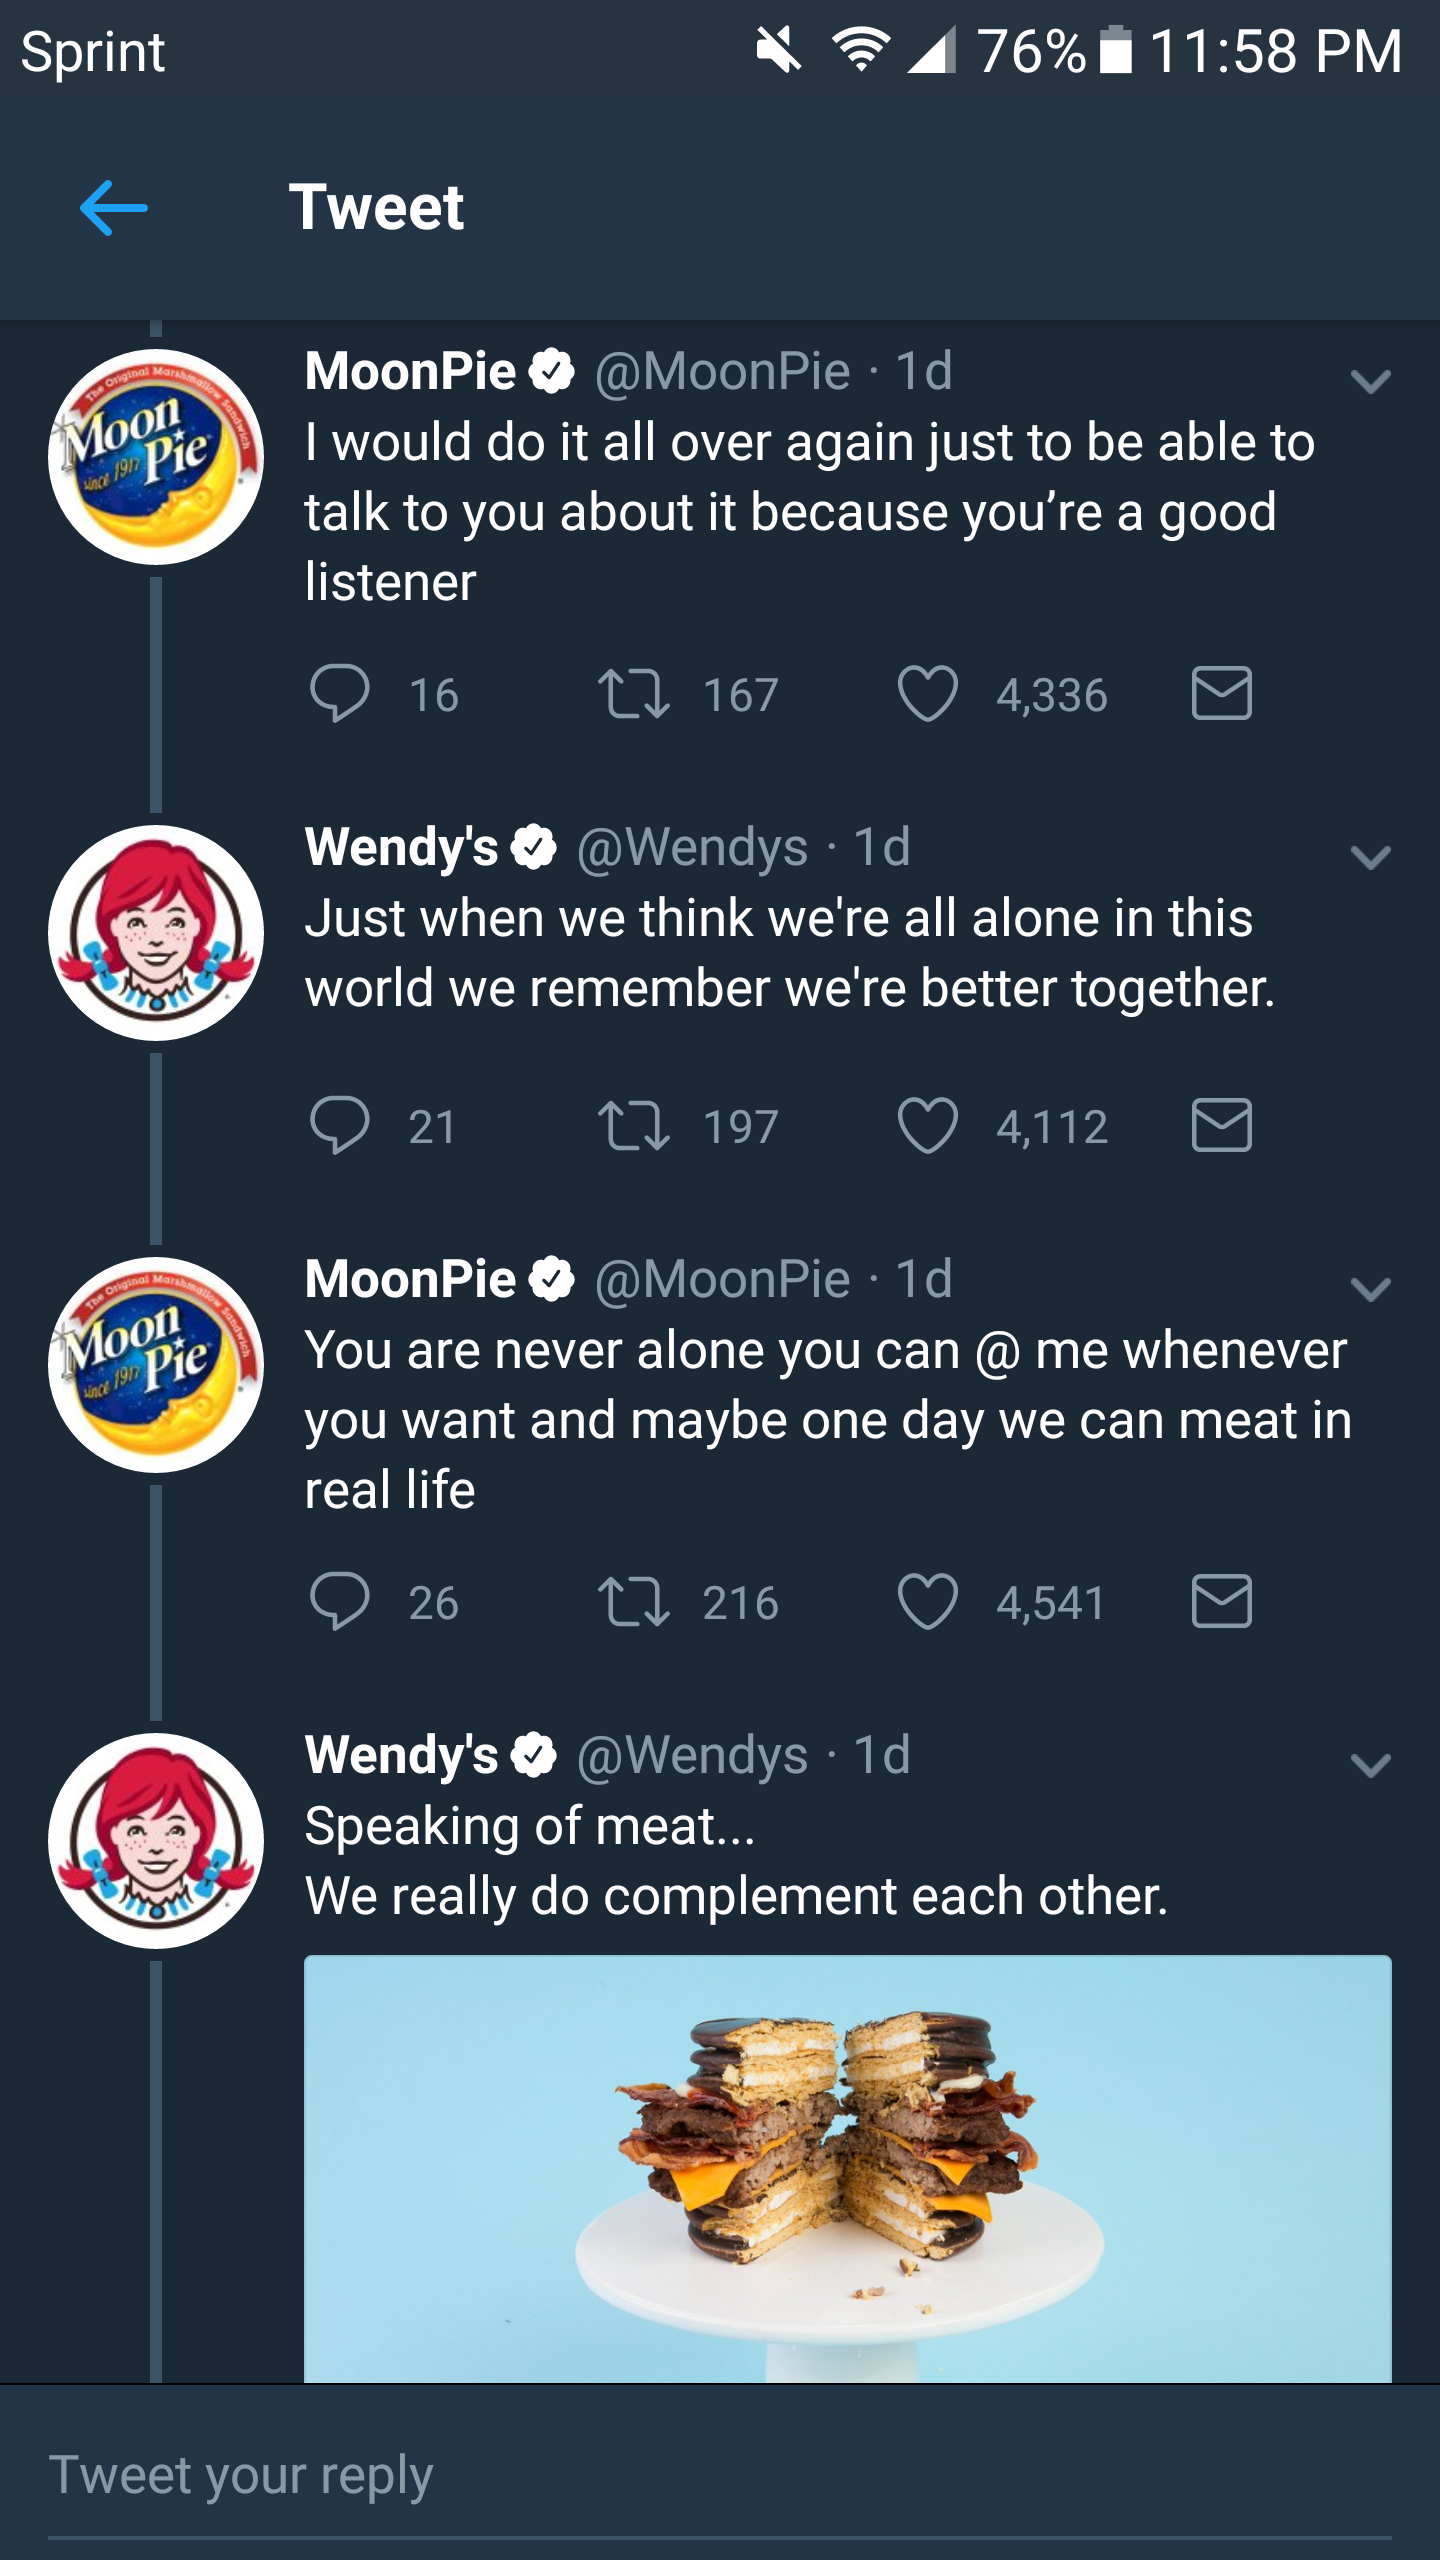 screenshot - Sprint 94 76% Tweet Mo MoonPie 1d I would do it all over again just to be able to talk to you about it because you're a good listener 16 167 4,336 Wendy's Wendys 1d Just when we think we're all alone in this world we remember we're better tog